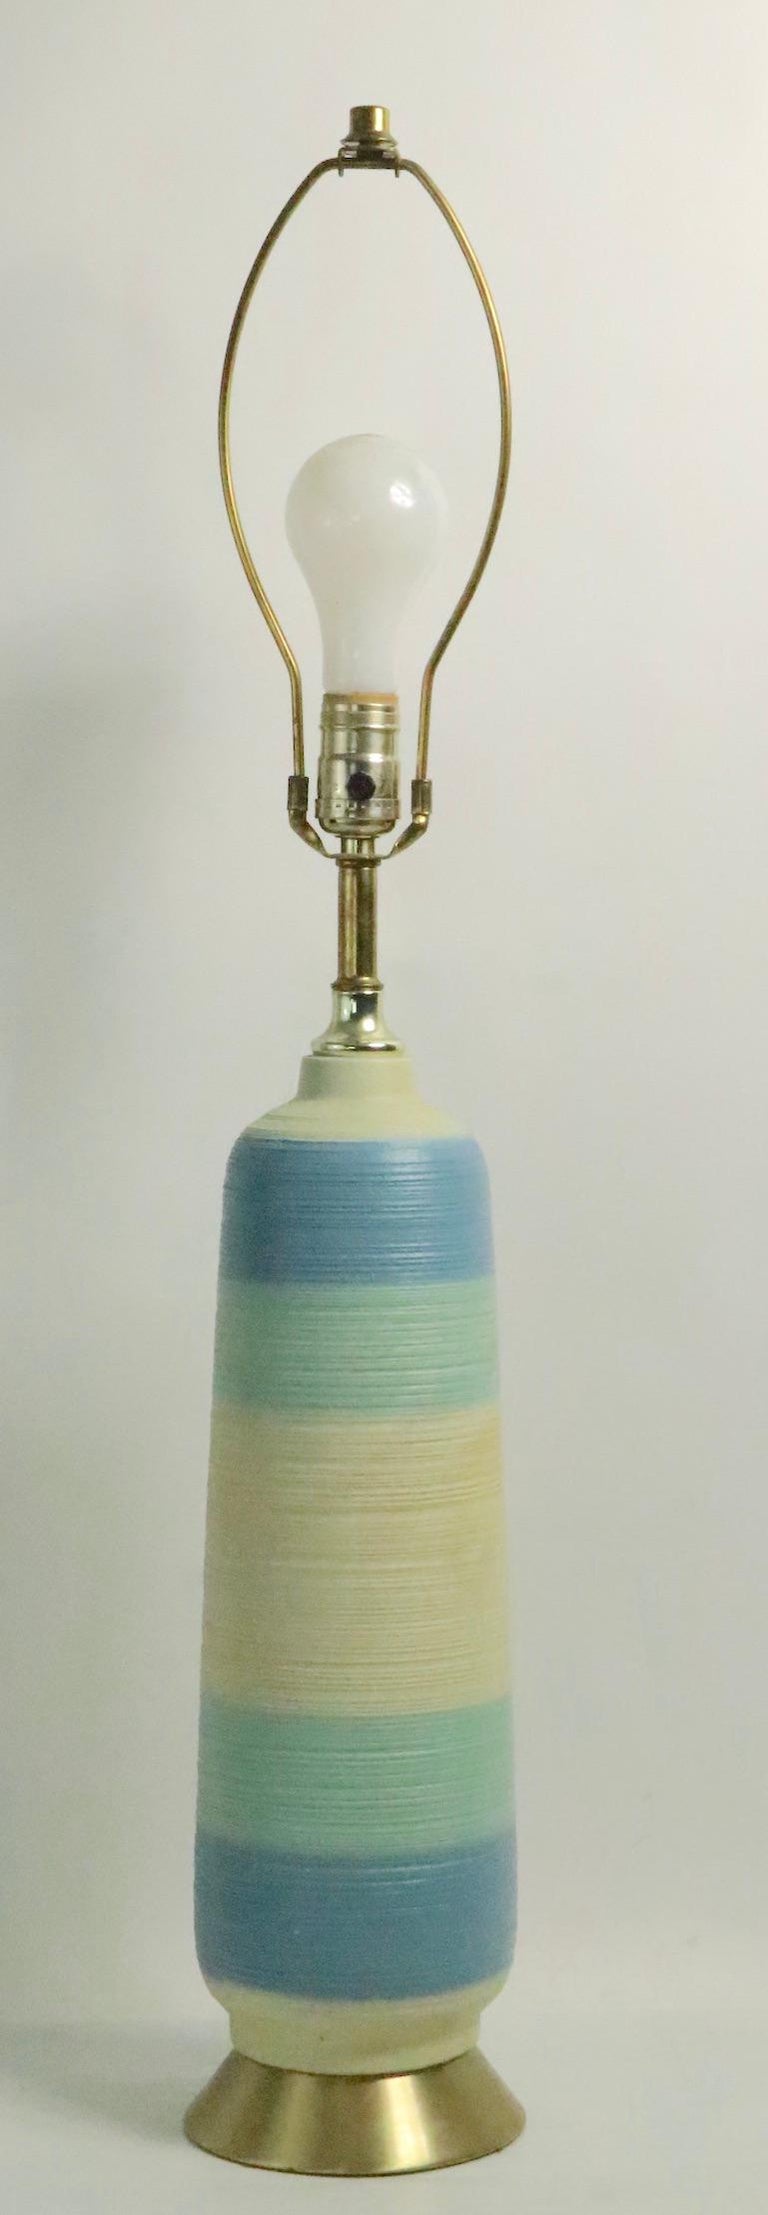 Pair of stylish midcentury ceramic table lamps having a textured surface with graduated color bands. Both are in very good, original and working condition showing only light cosmetic wear normal and consistent with age. Both lamps accept standard